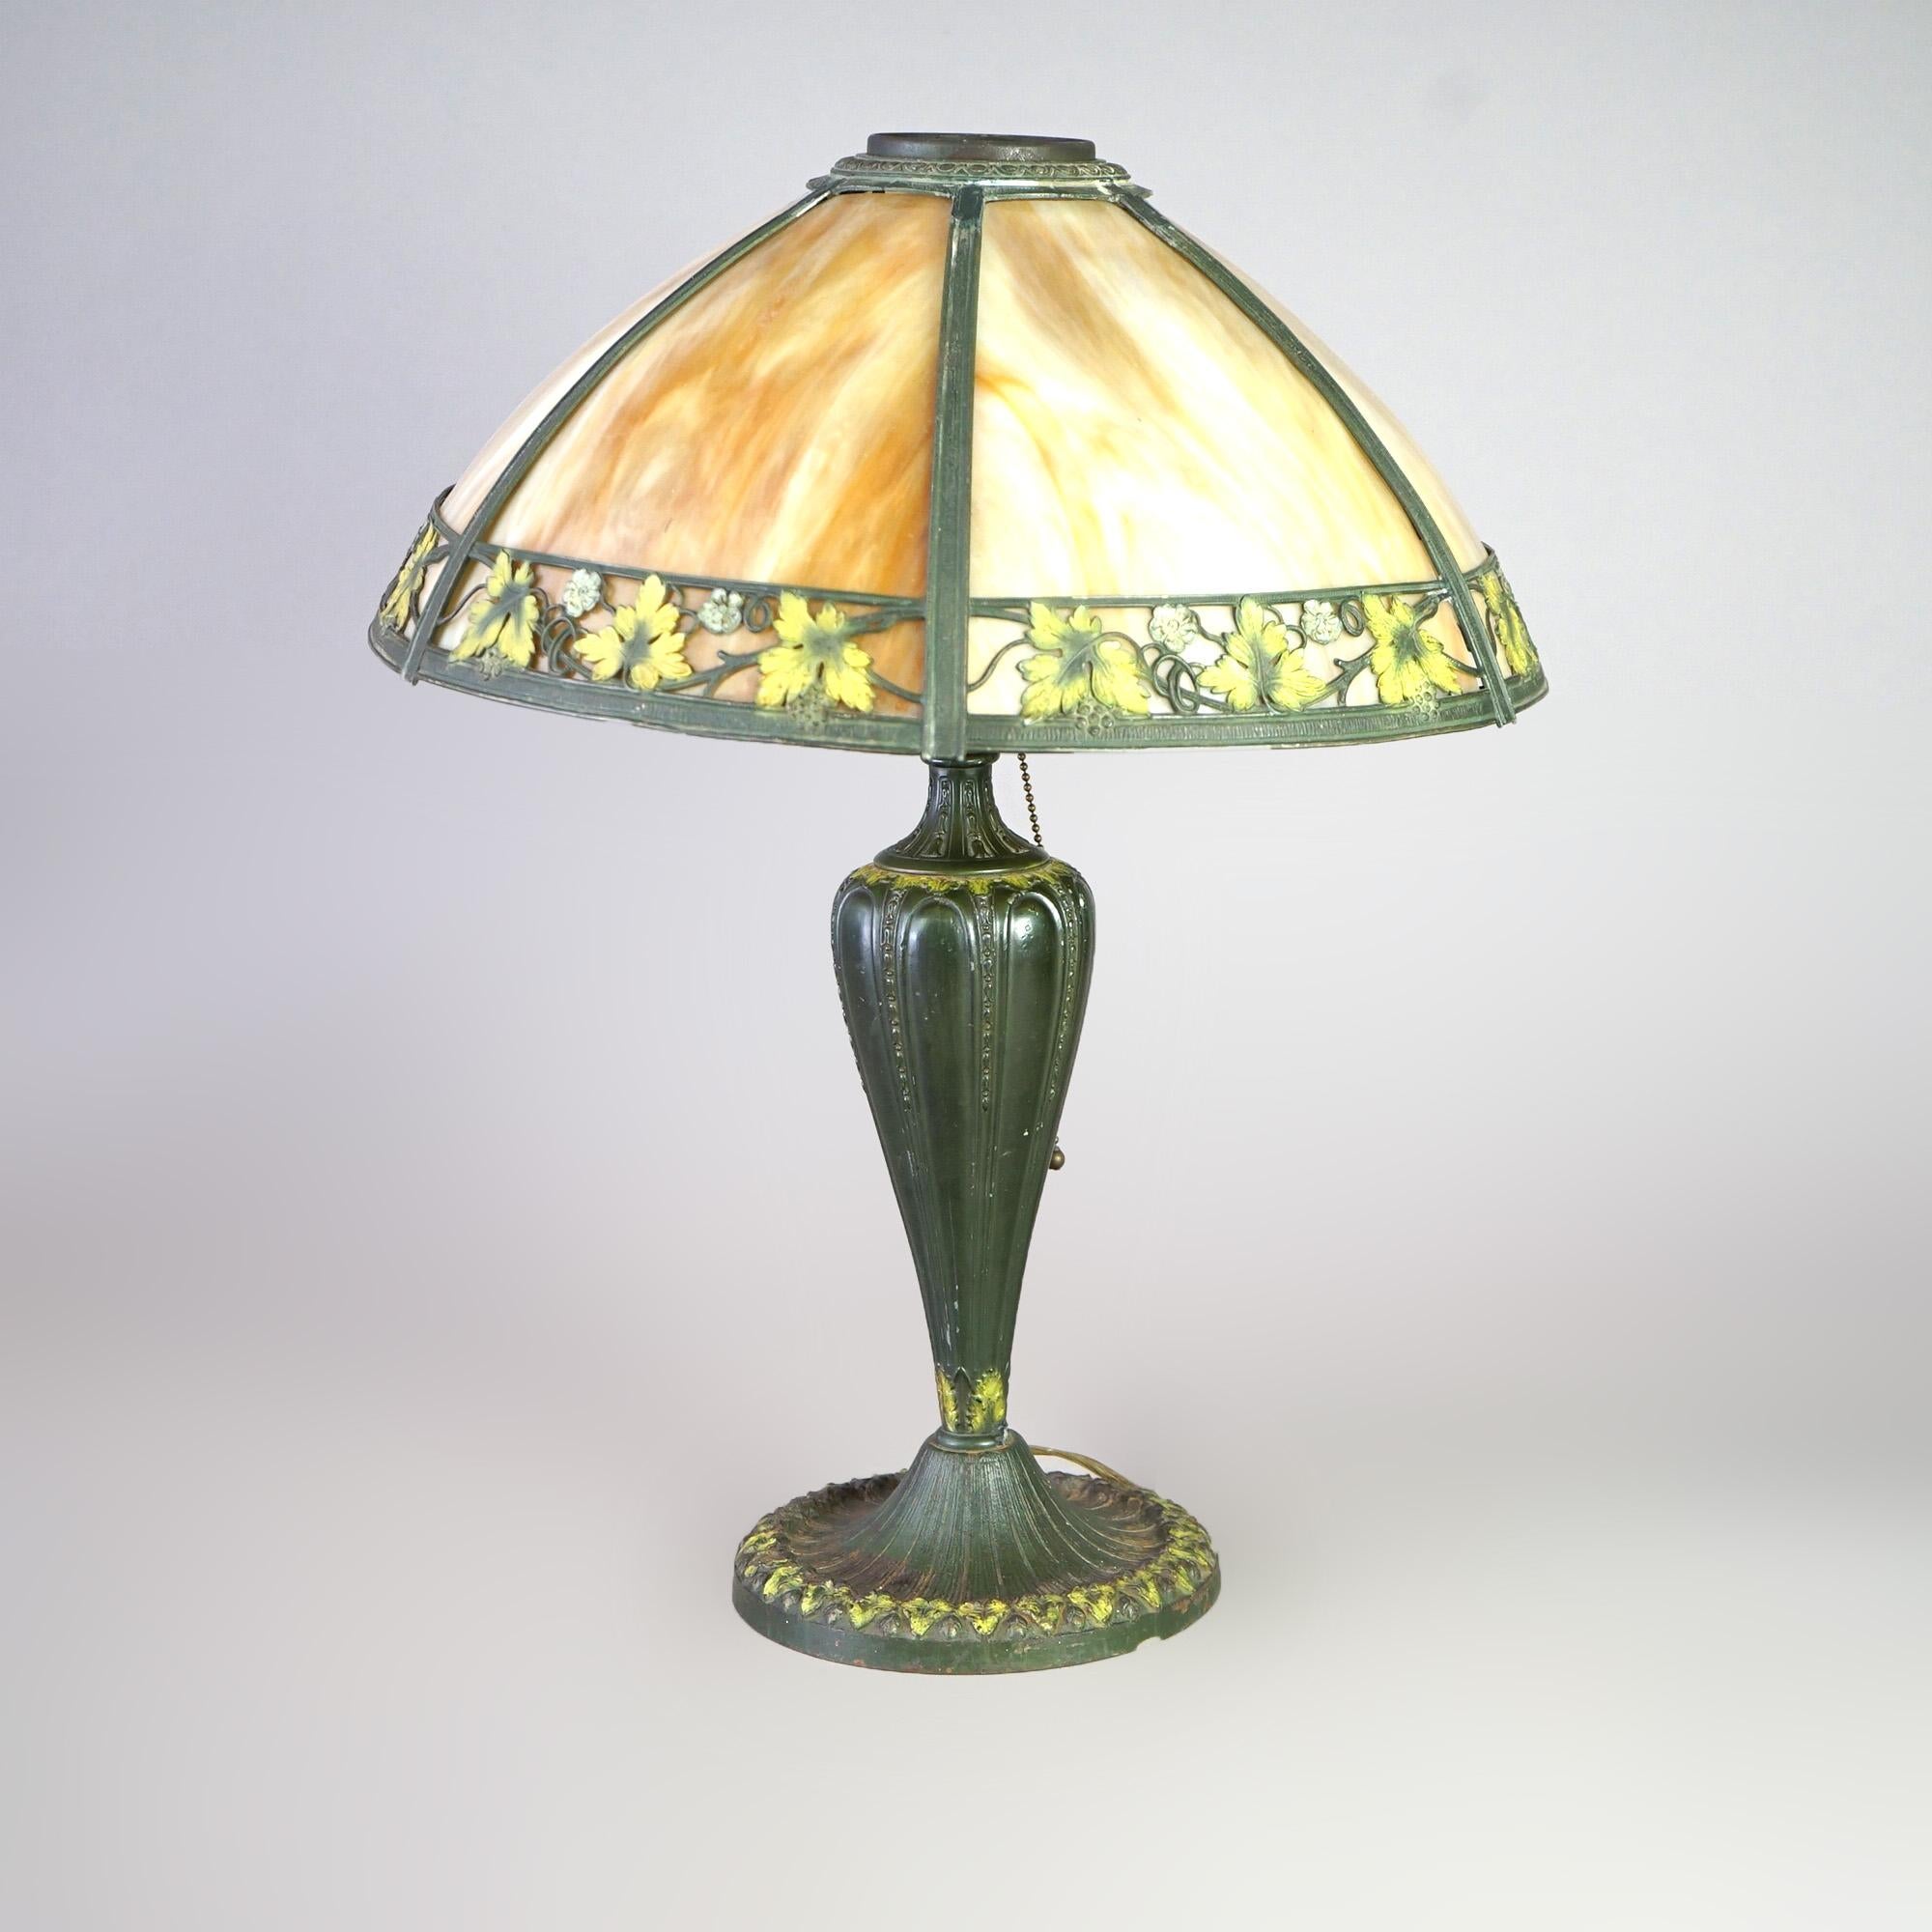 An antique Arts and Crafts table lamp by Raynaud offers polychromed cast single socket base with dome shade having polychromed leaf and berry design housing bent slag glass panels, c1920

Measures - 21